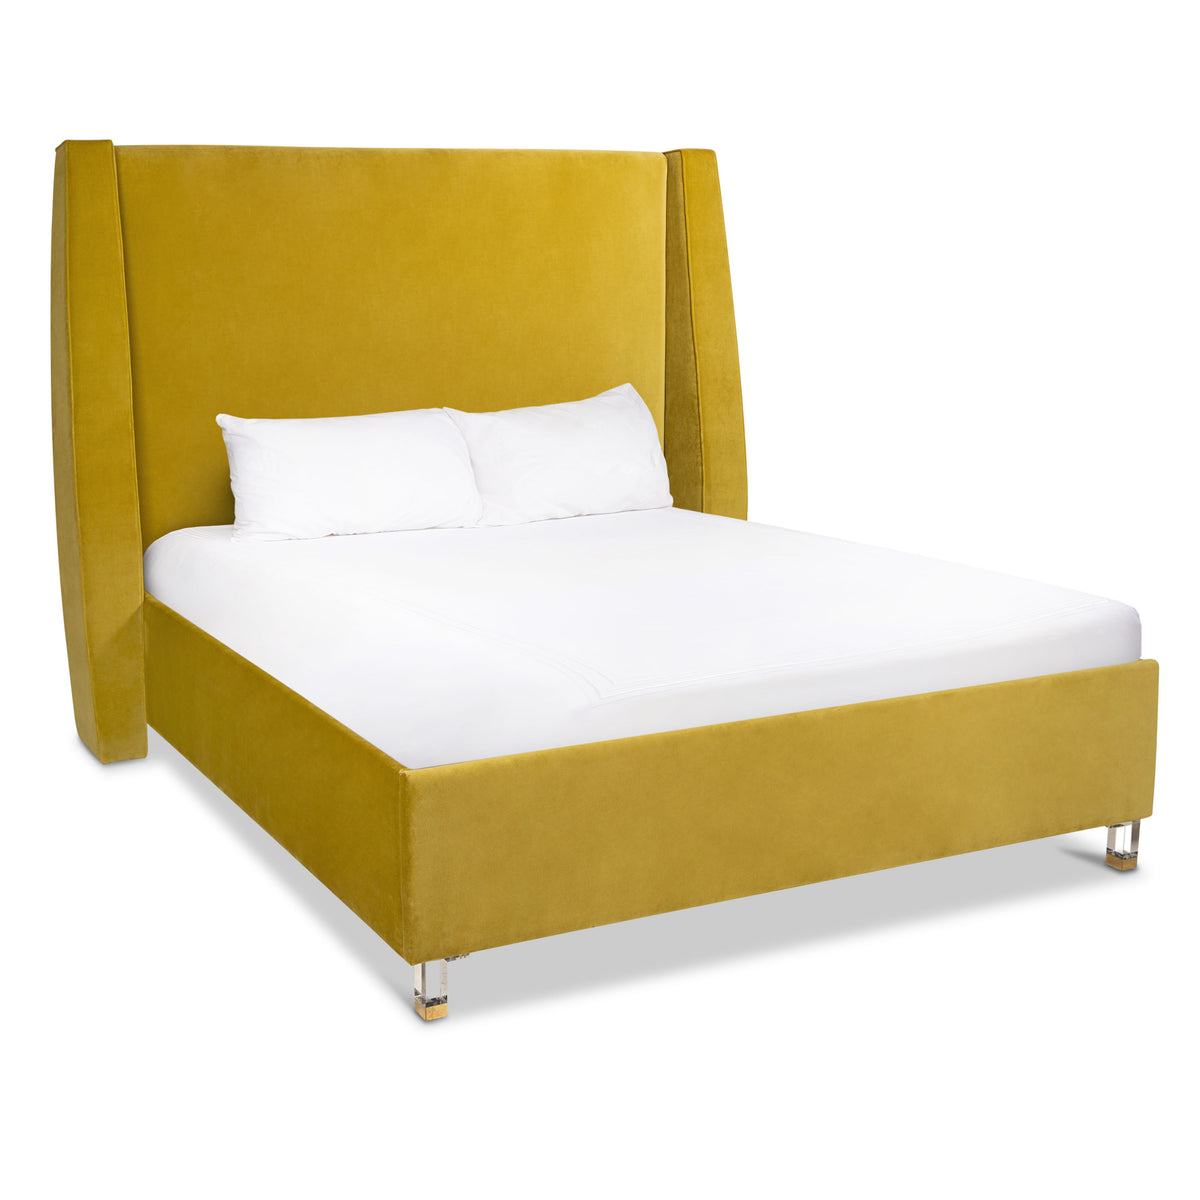 St. Germain Bed in Wasabi